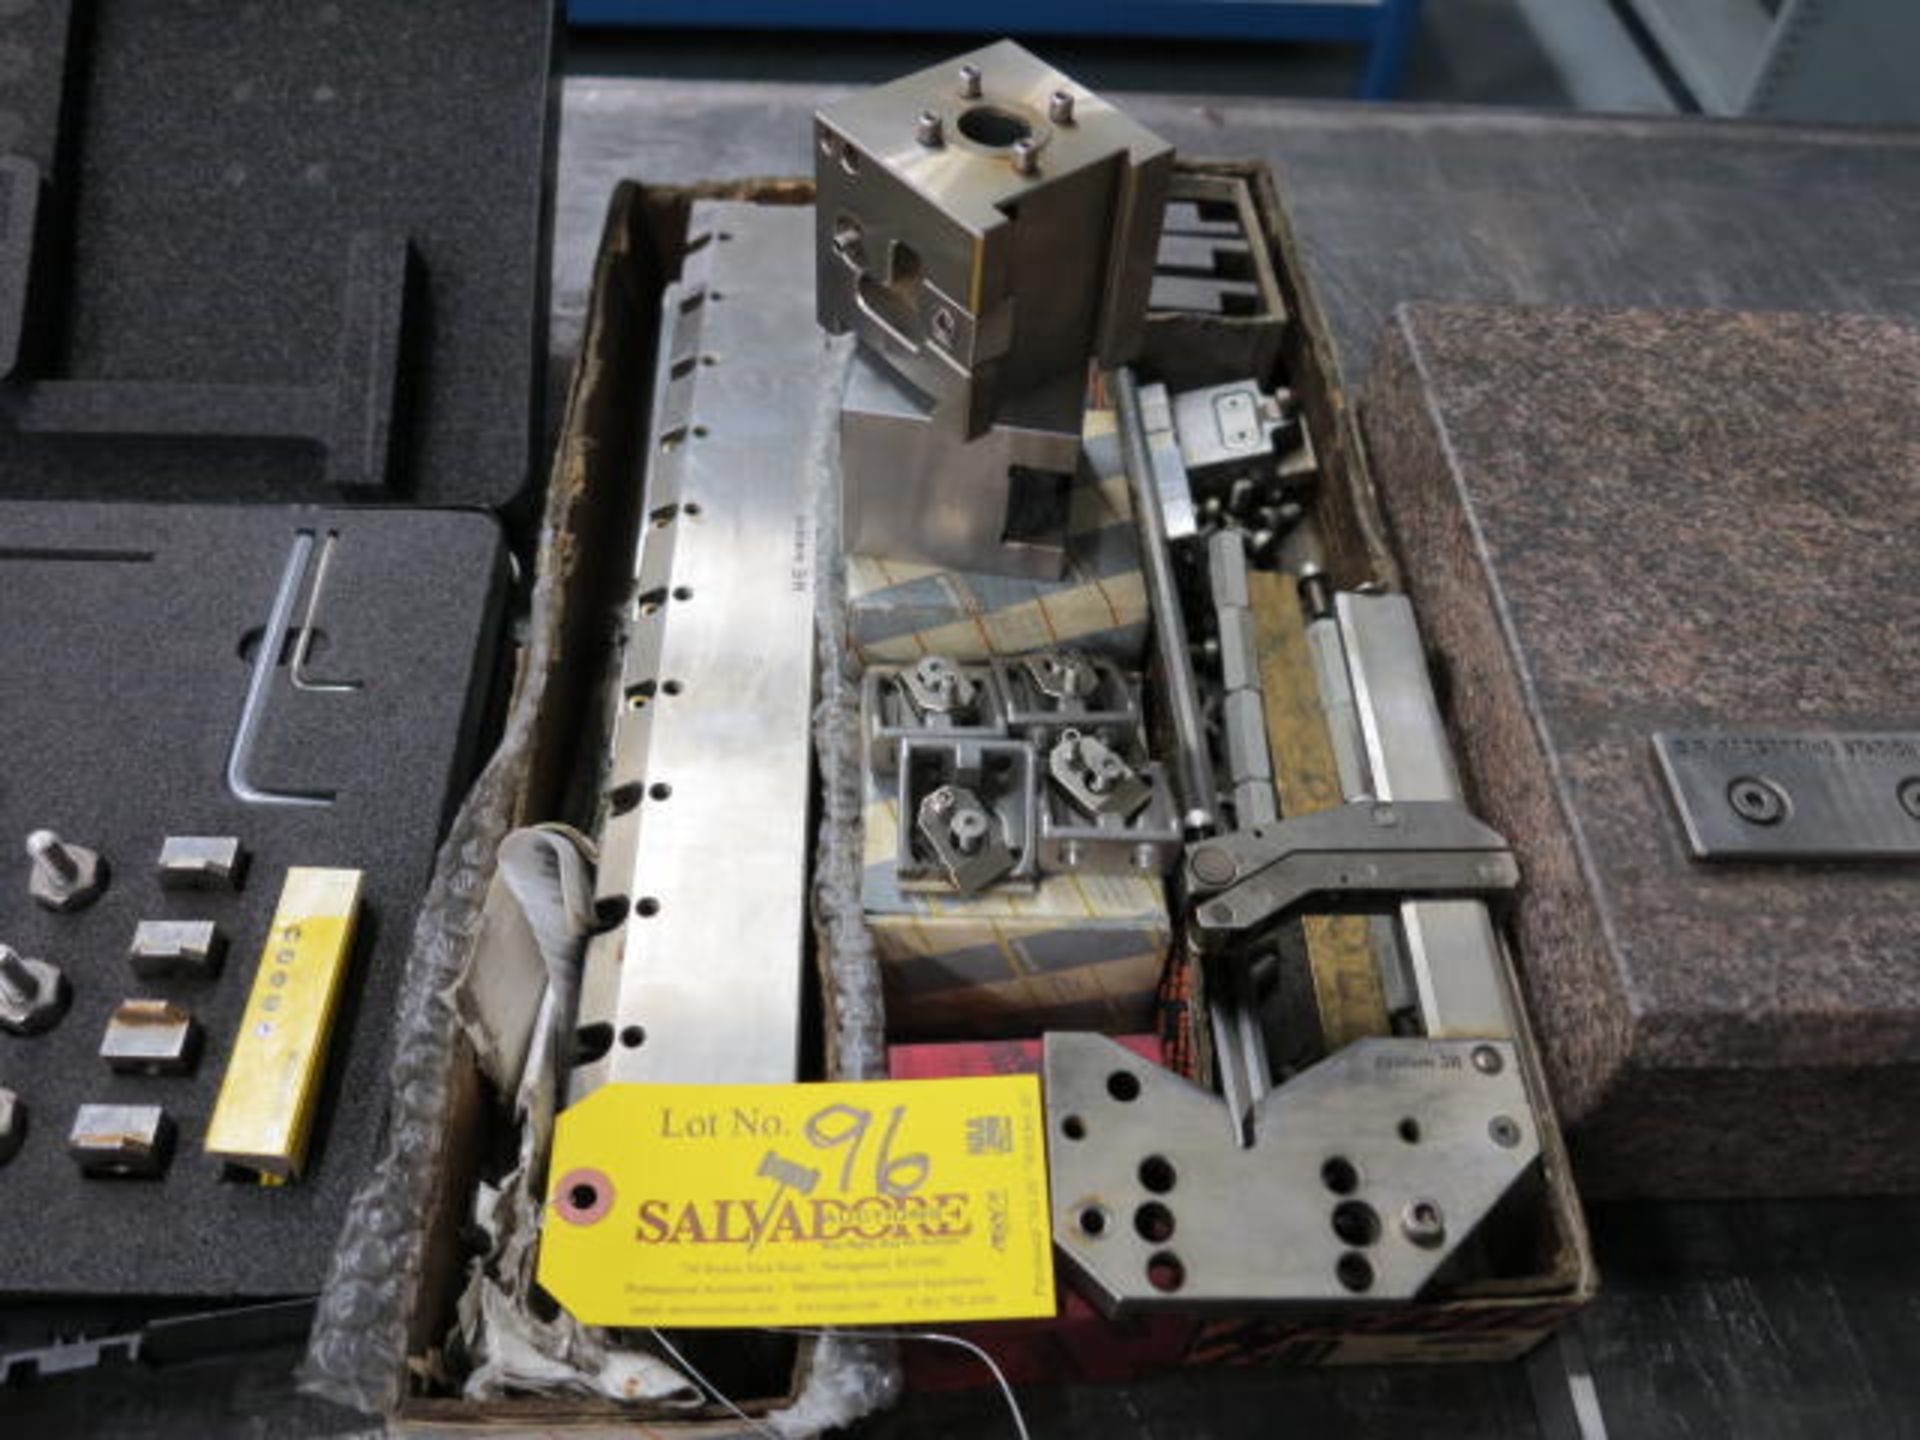 Lot 3R Tooling for Wire EDM with Presesetting Station, Rails, Fixtures and Tool Carriers - Image 3 of 4